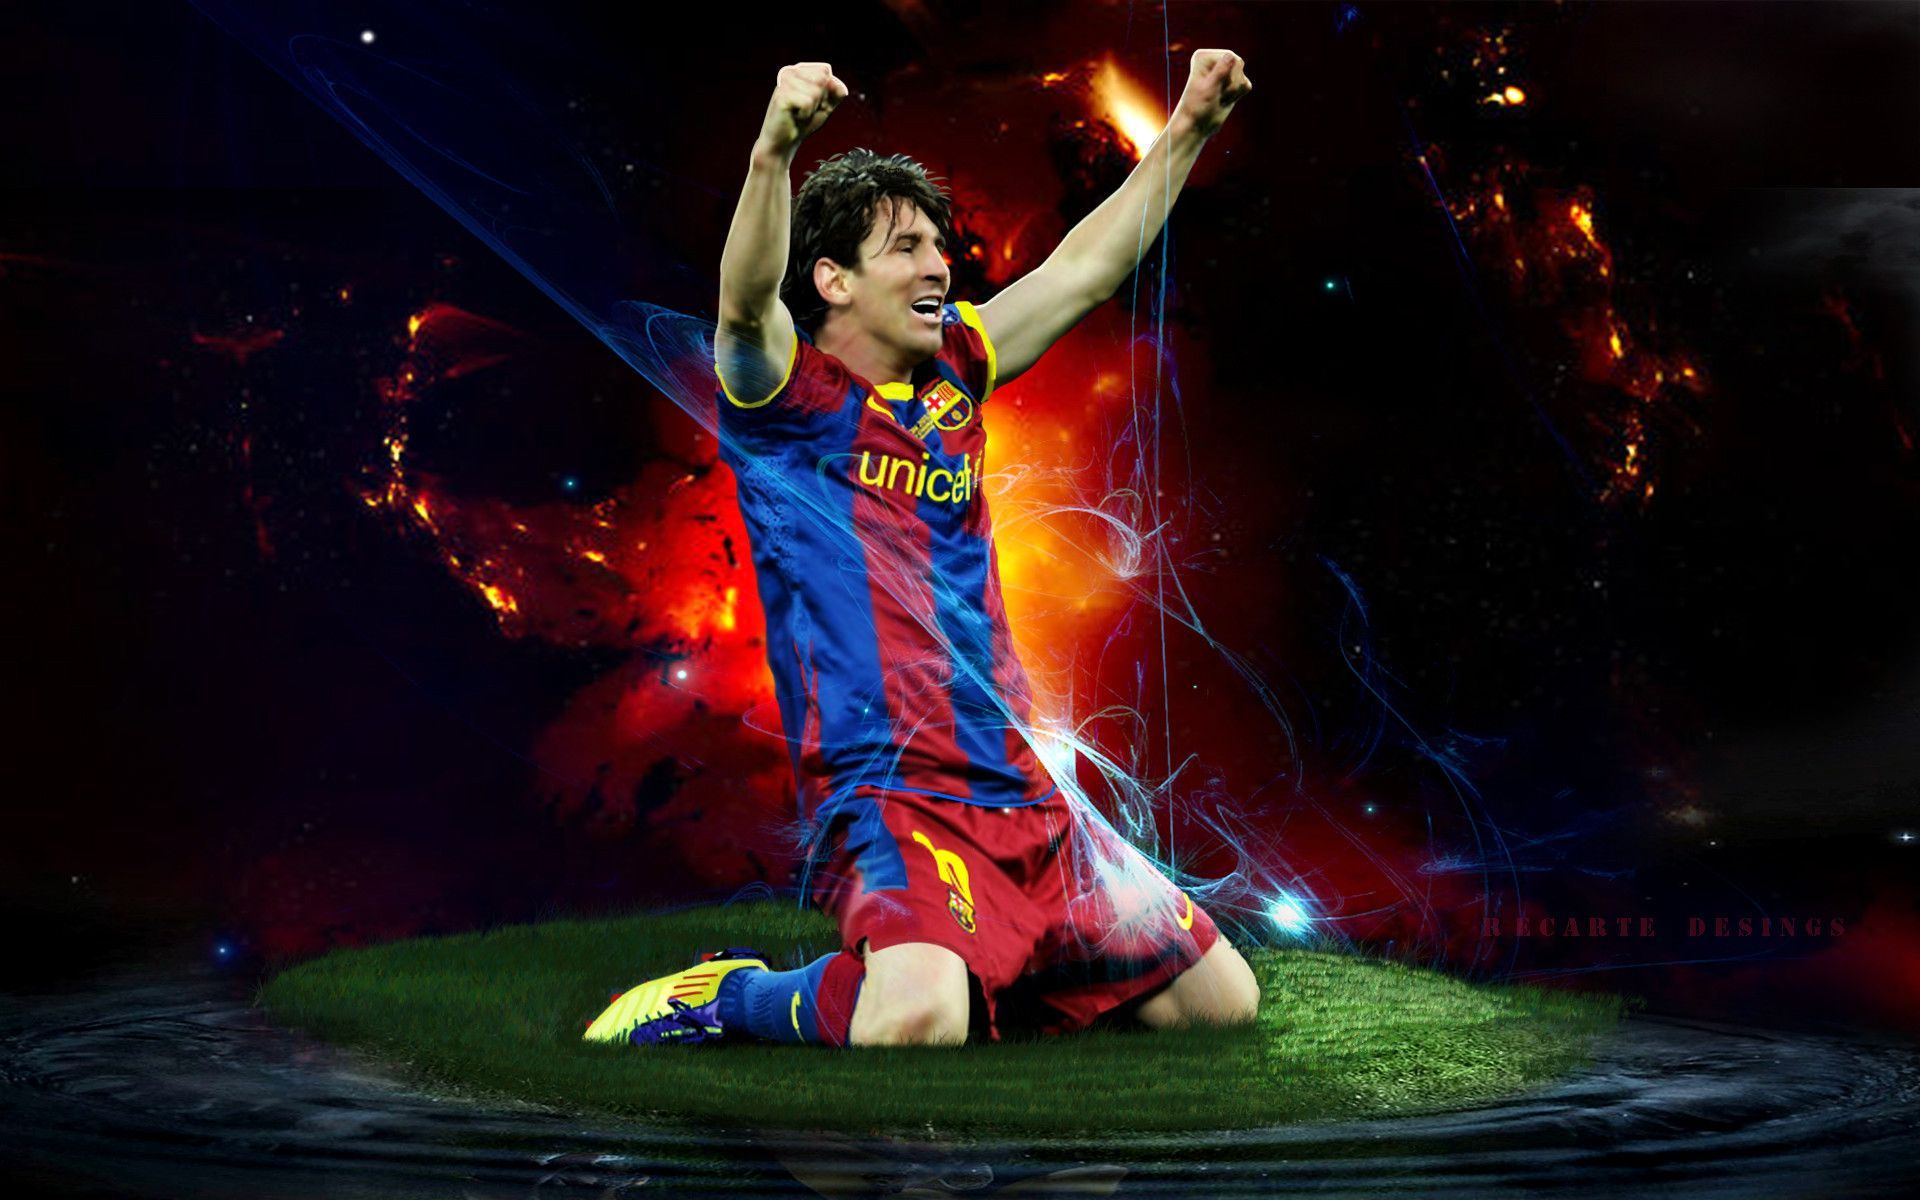 Free Download 40 Lionel Messi HD Wallpapers